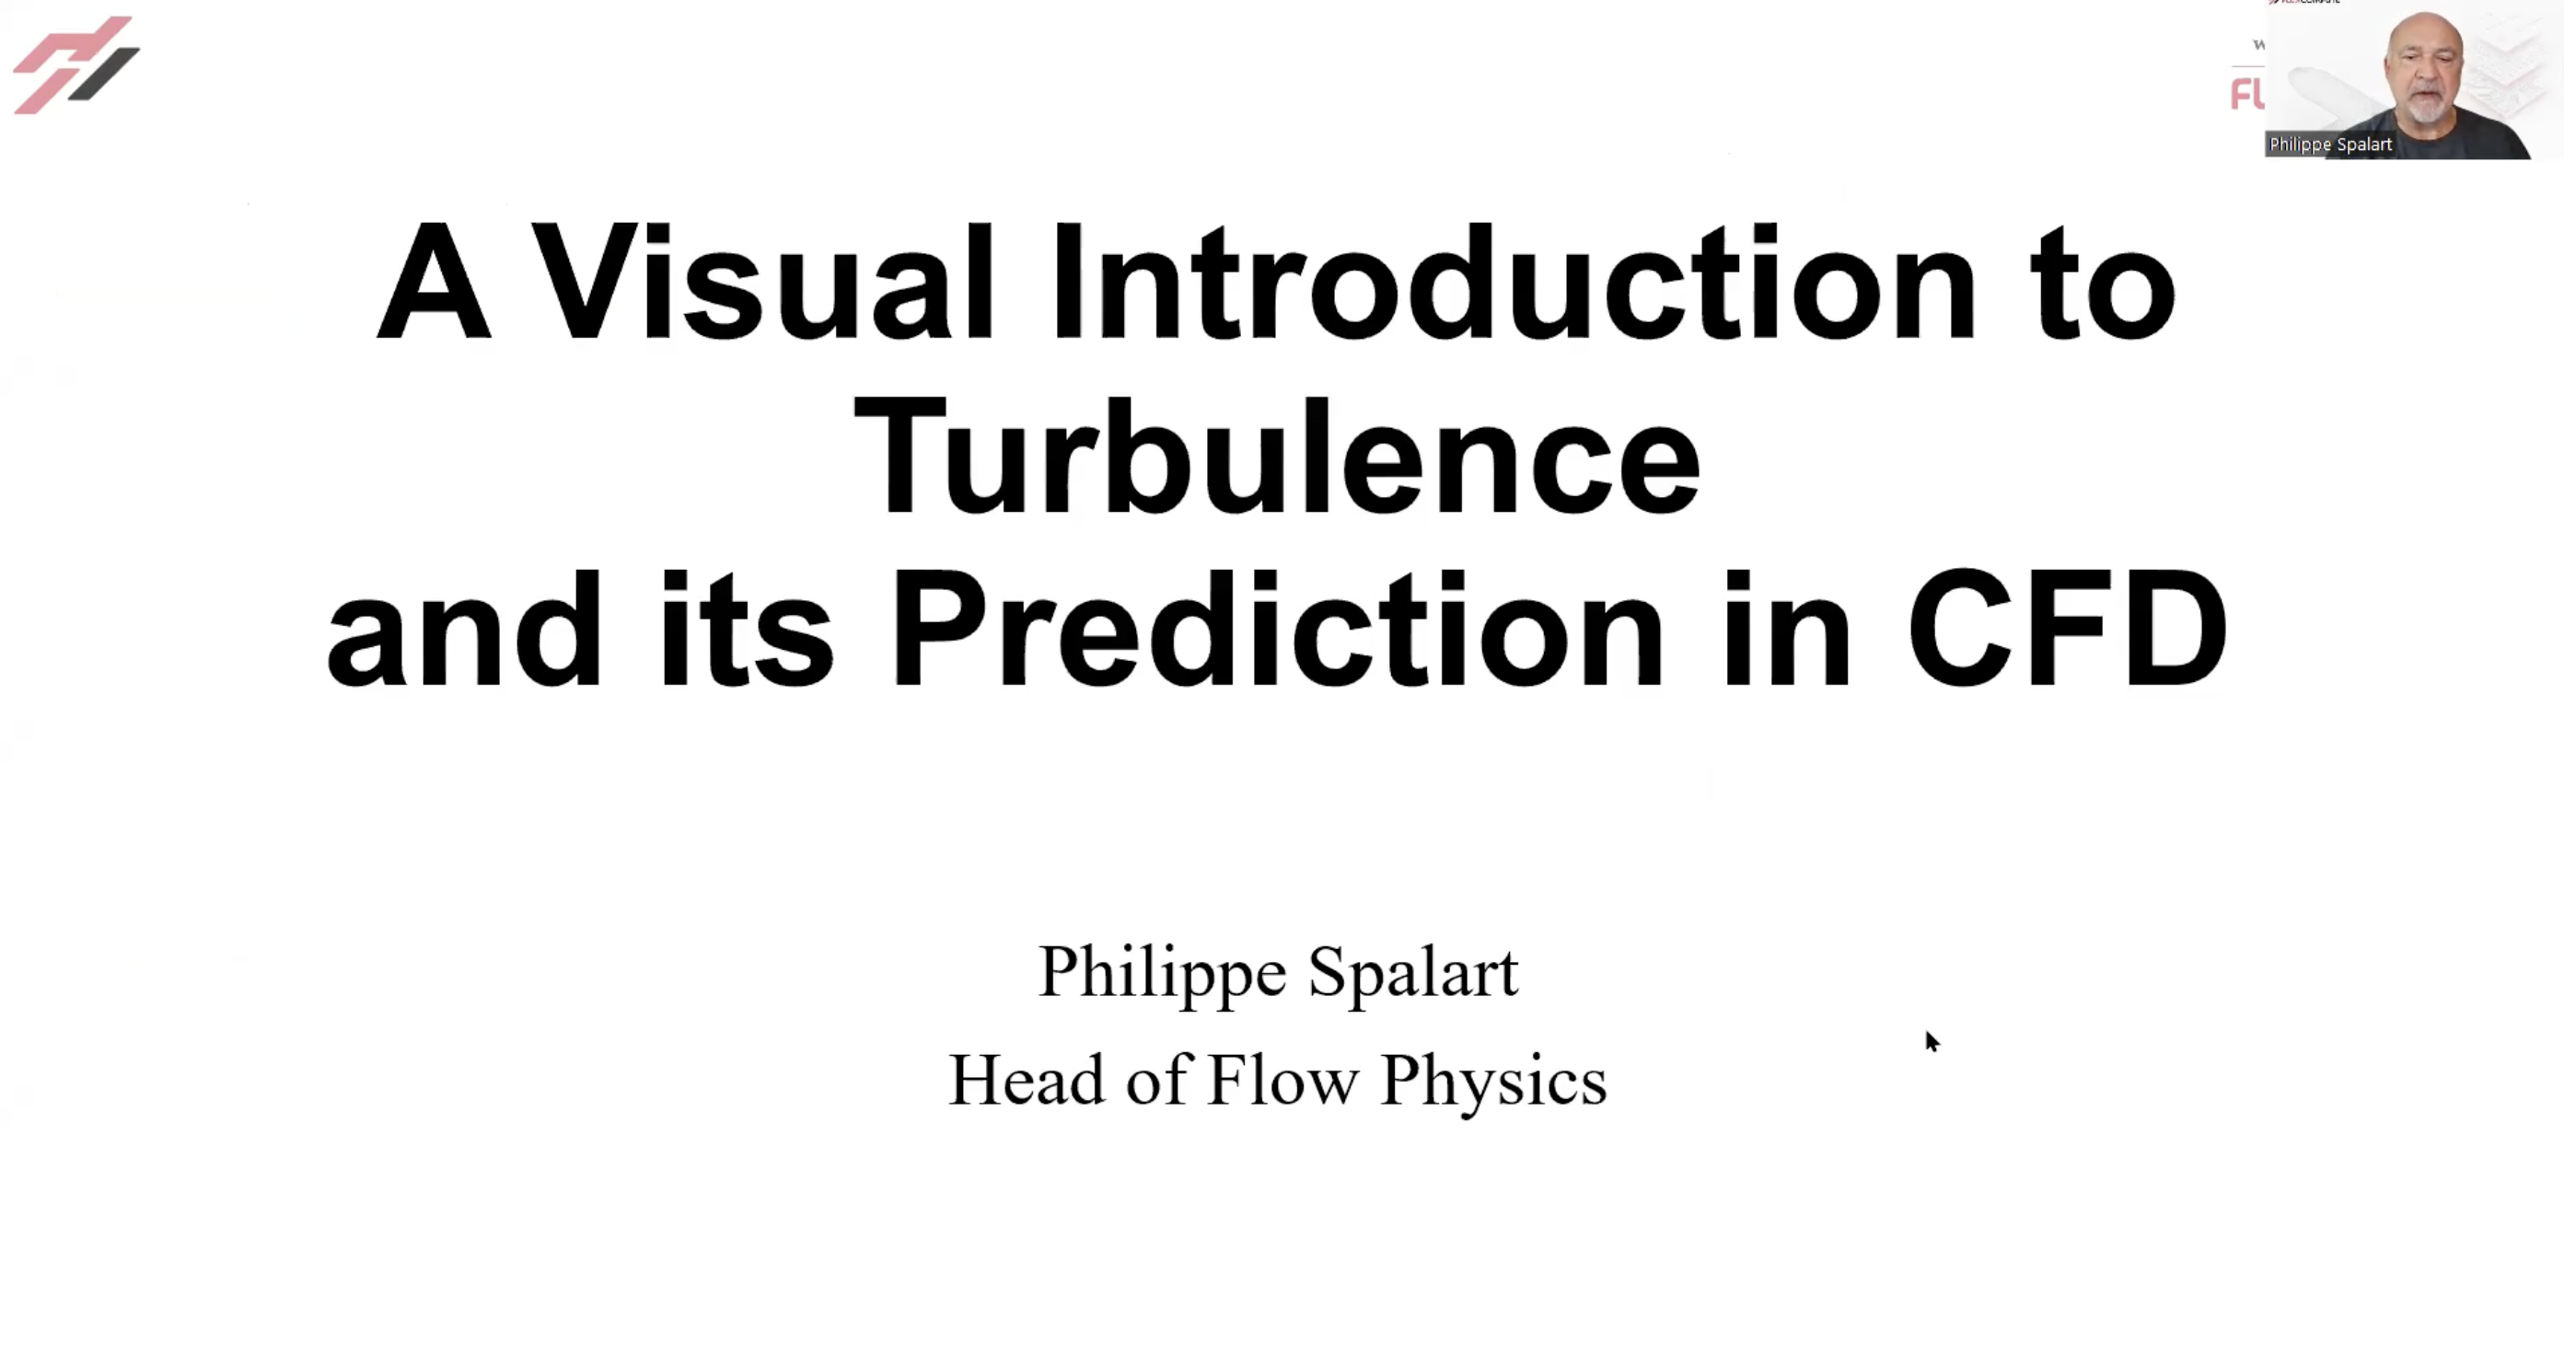 Lecture 1: A Visual Introduction to Turbulence and its Prediction in CFD